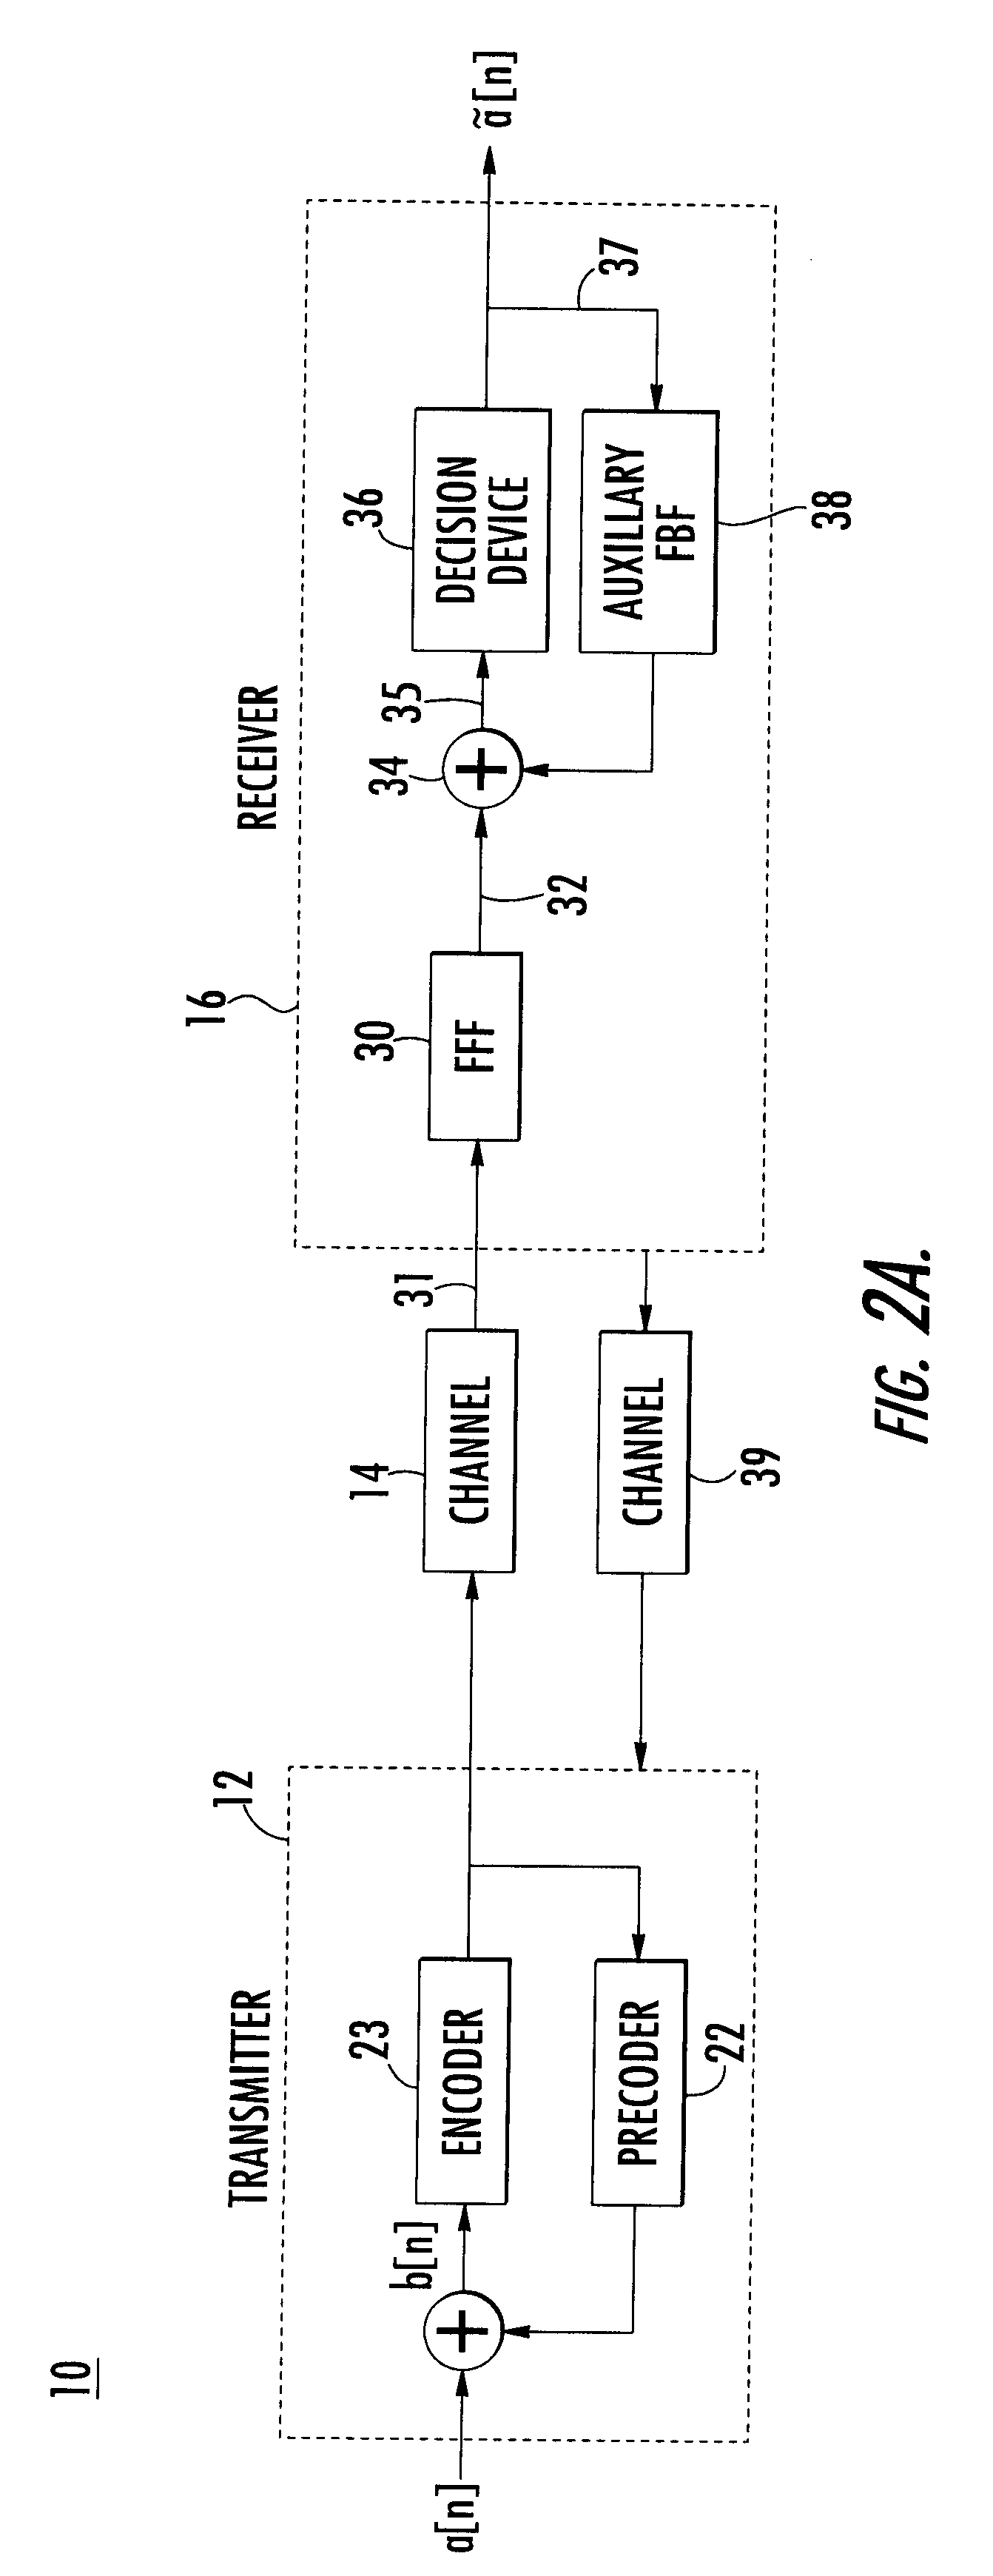 Method and apparatus for adaptively compensating channel or system variations in precoded communications system